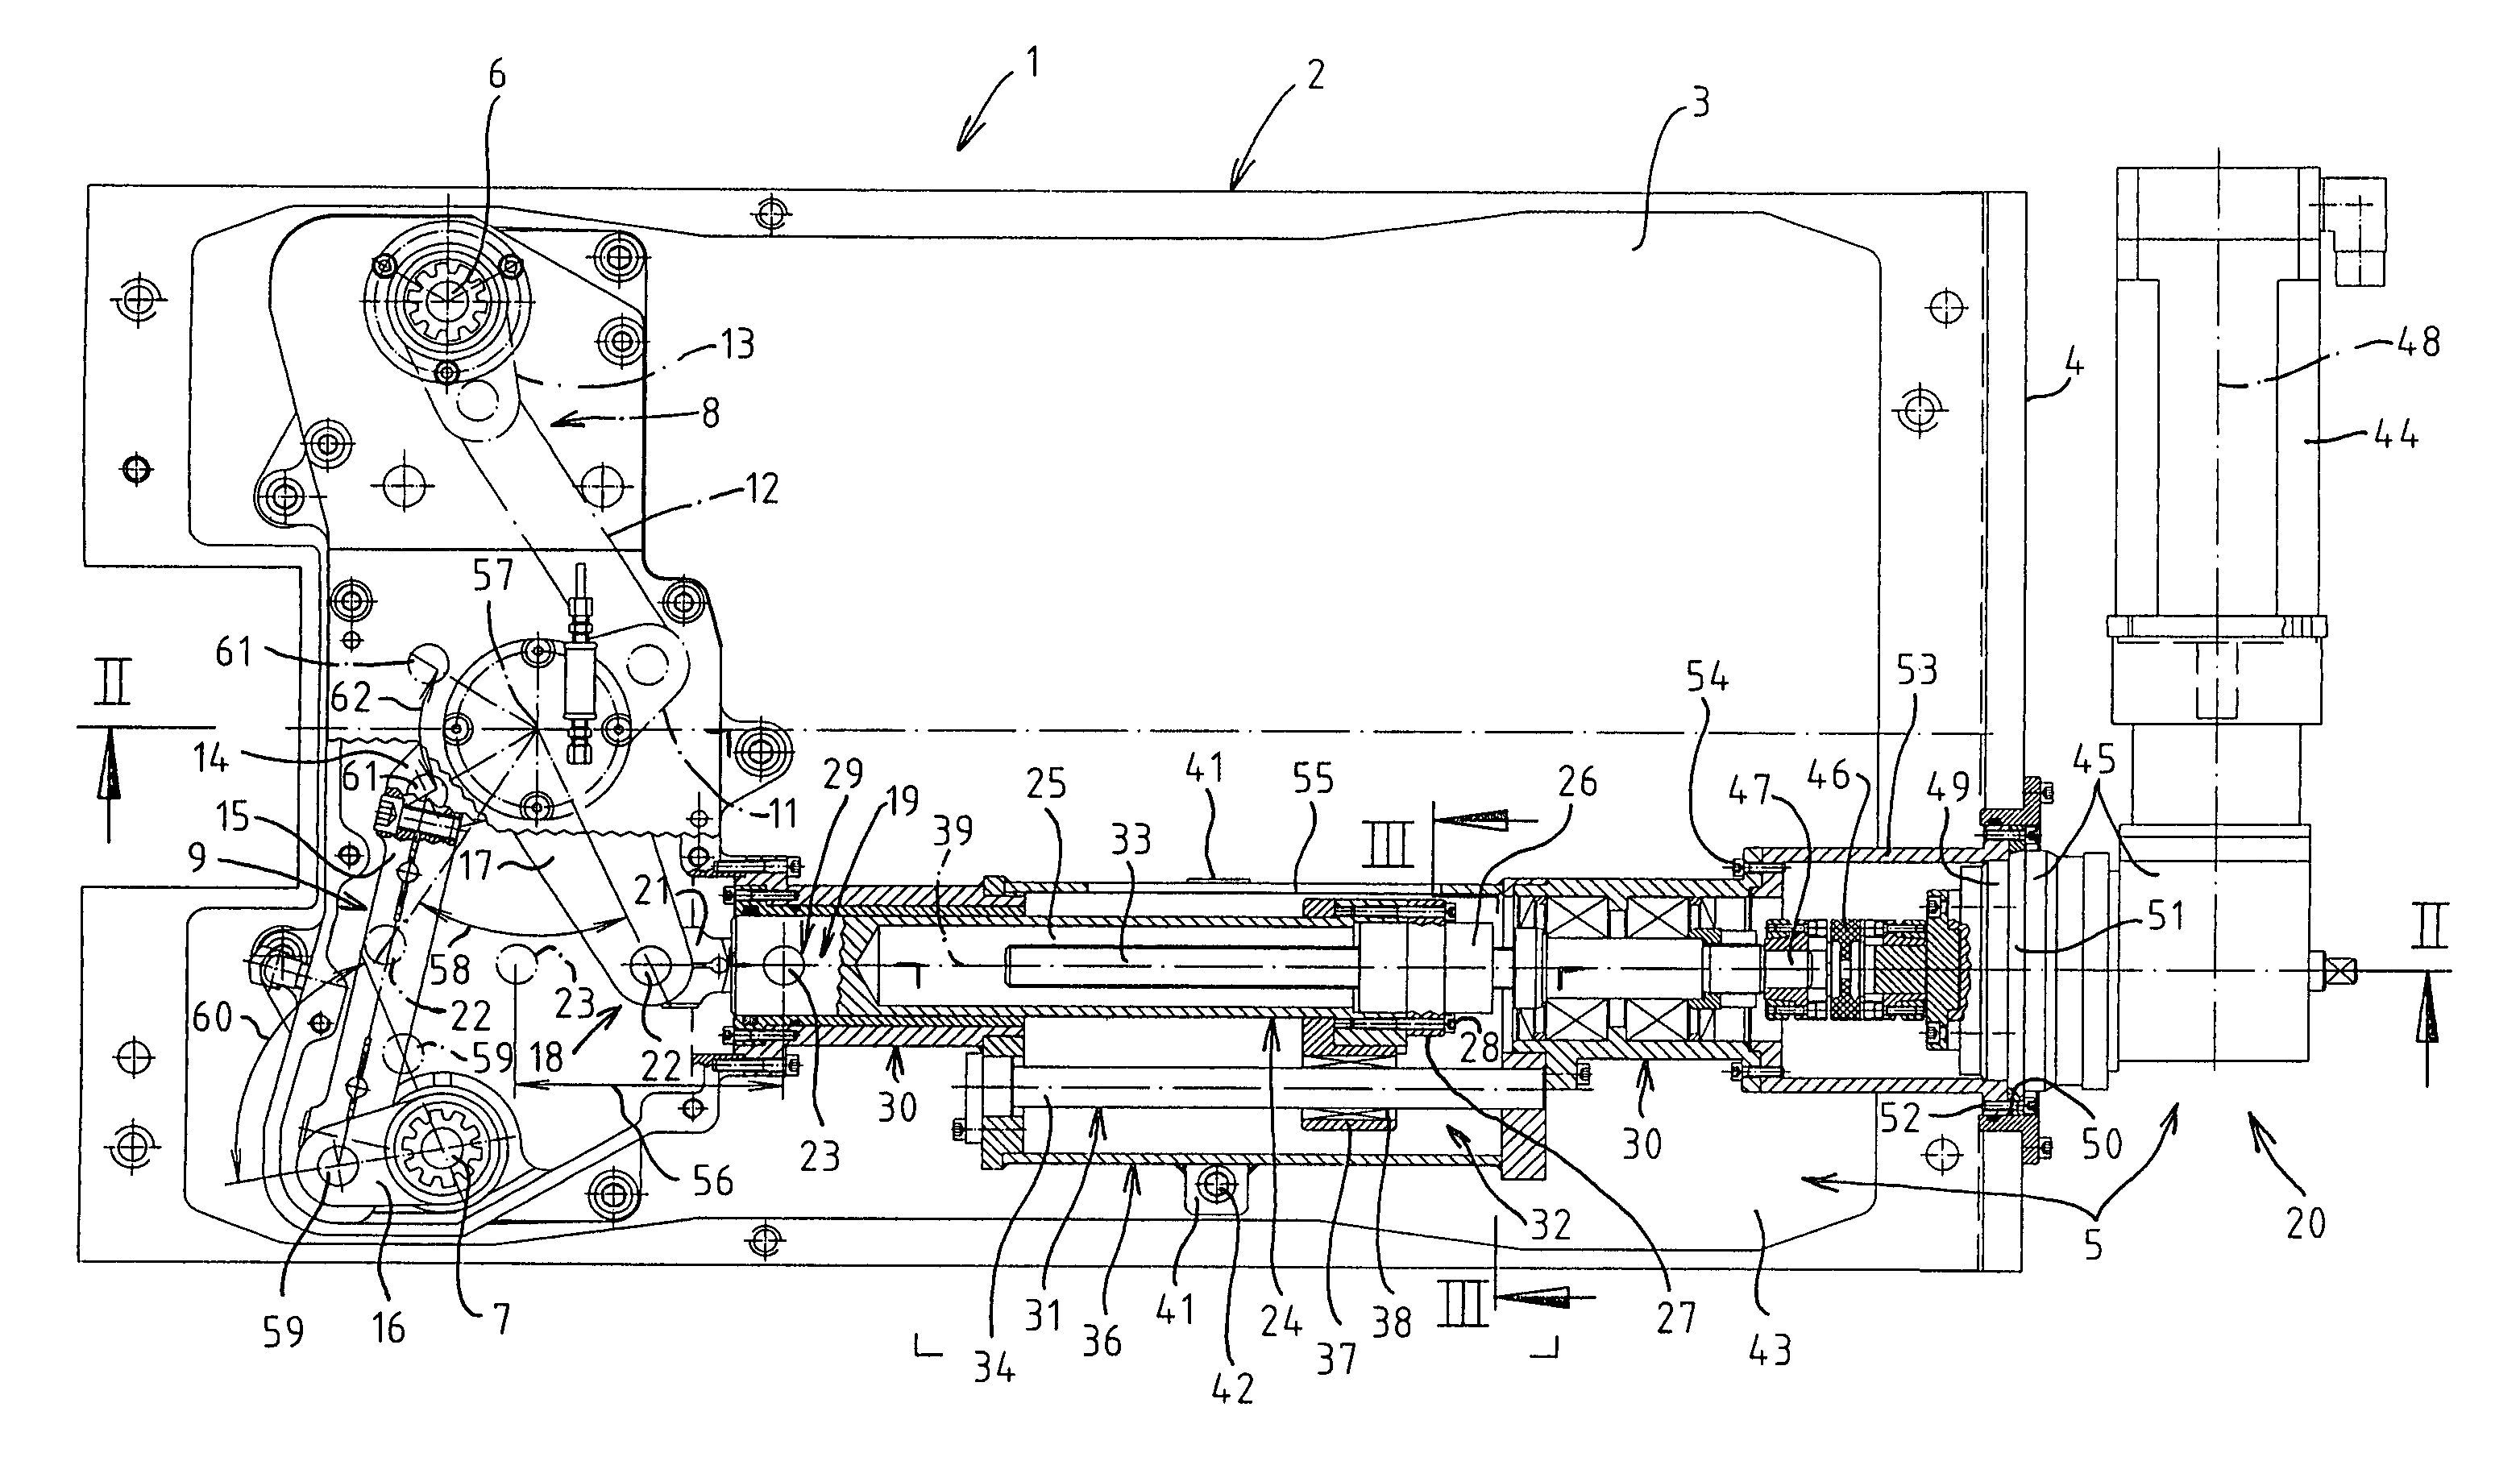 Device for closing and opening the mold halves of a glass molding machine